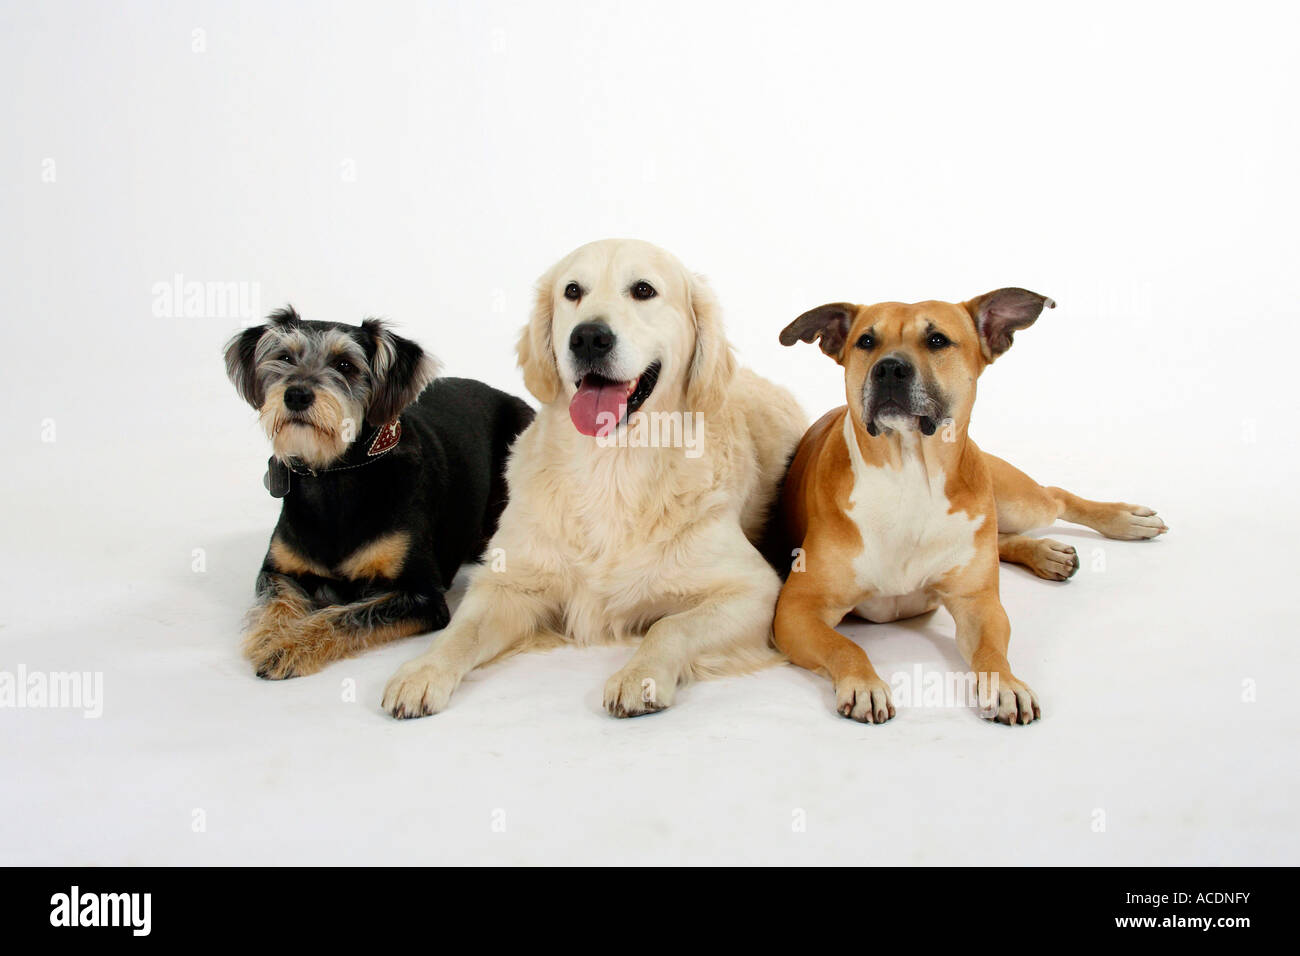 American Staffordshire Terrier Mixed Breed Dog And Golden Retriever Stock Photo Alamy